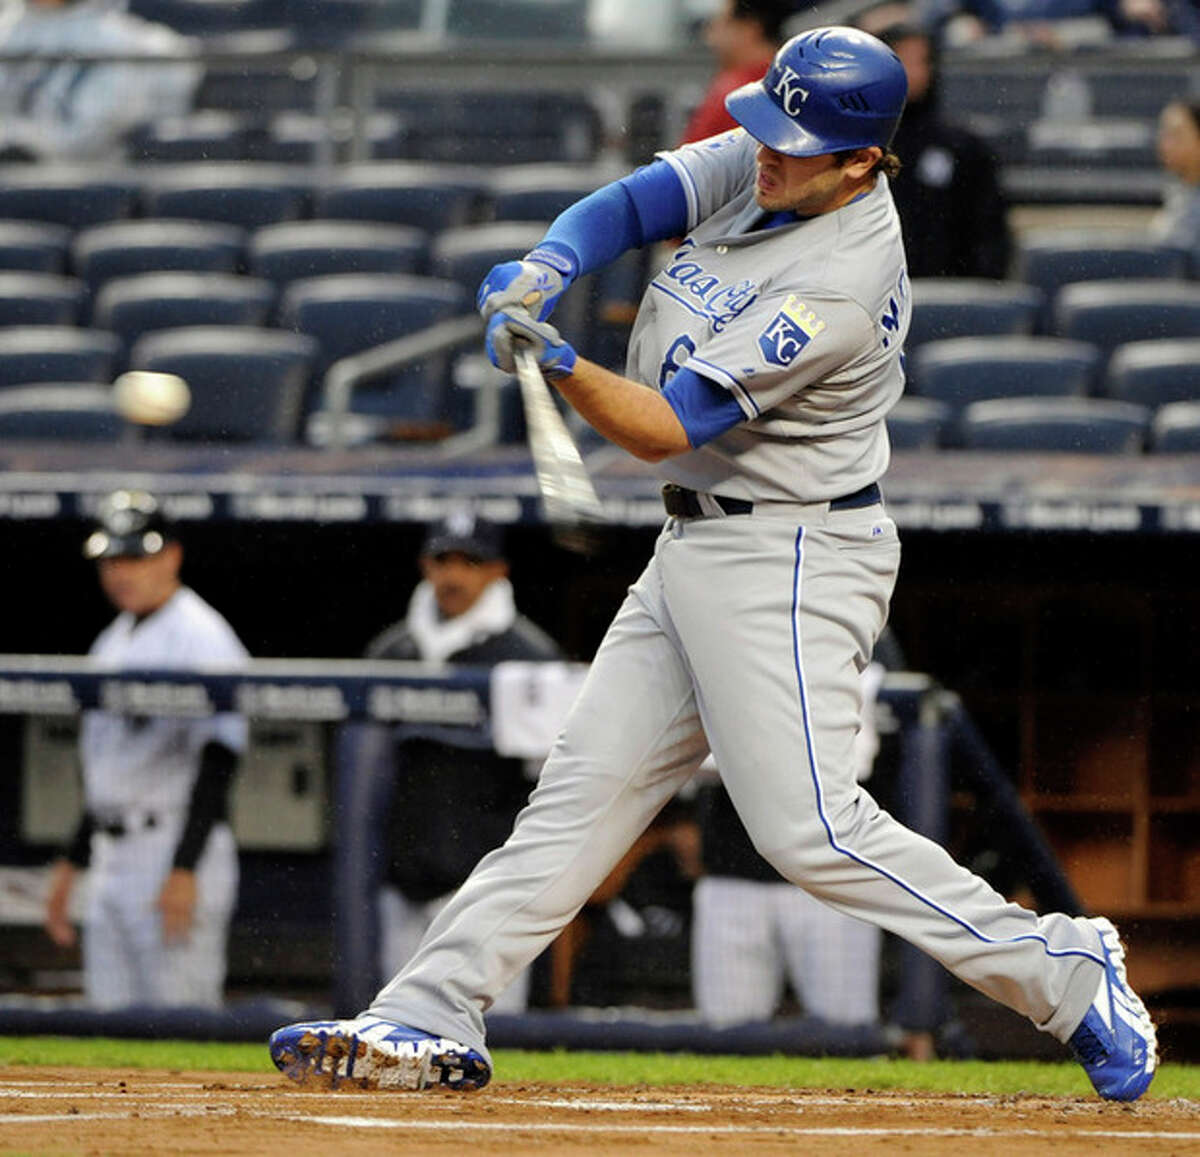 Kansas City Royals' Mike Moustakas hits a two-run home run during the first inning of a baseball game against the New York Yankees, Monday, May 21, 2012, at Yankee Stadium in New York. (AP Photo/Bill Kostroun)